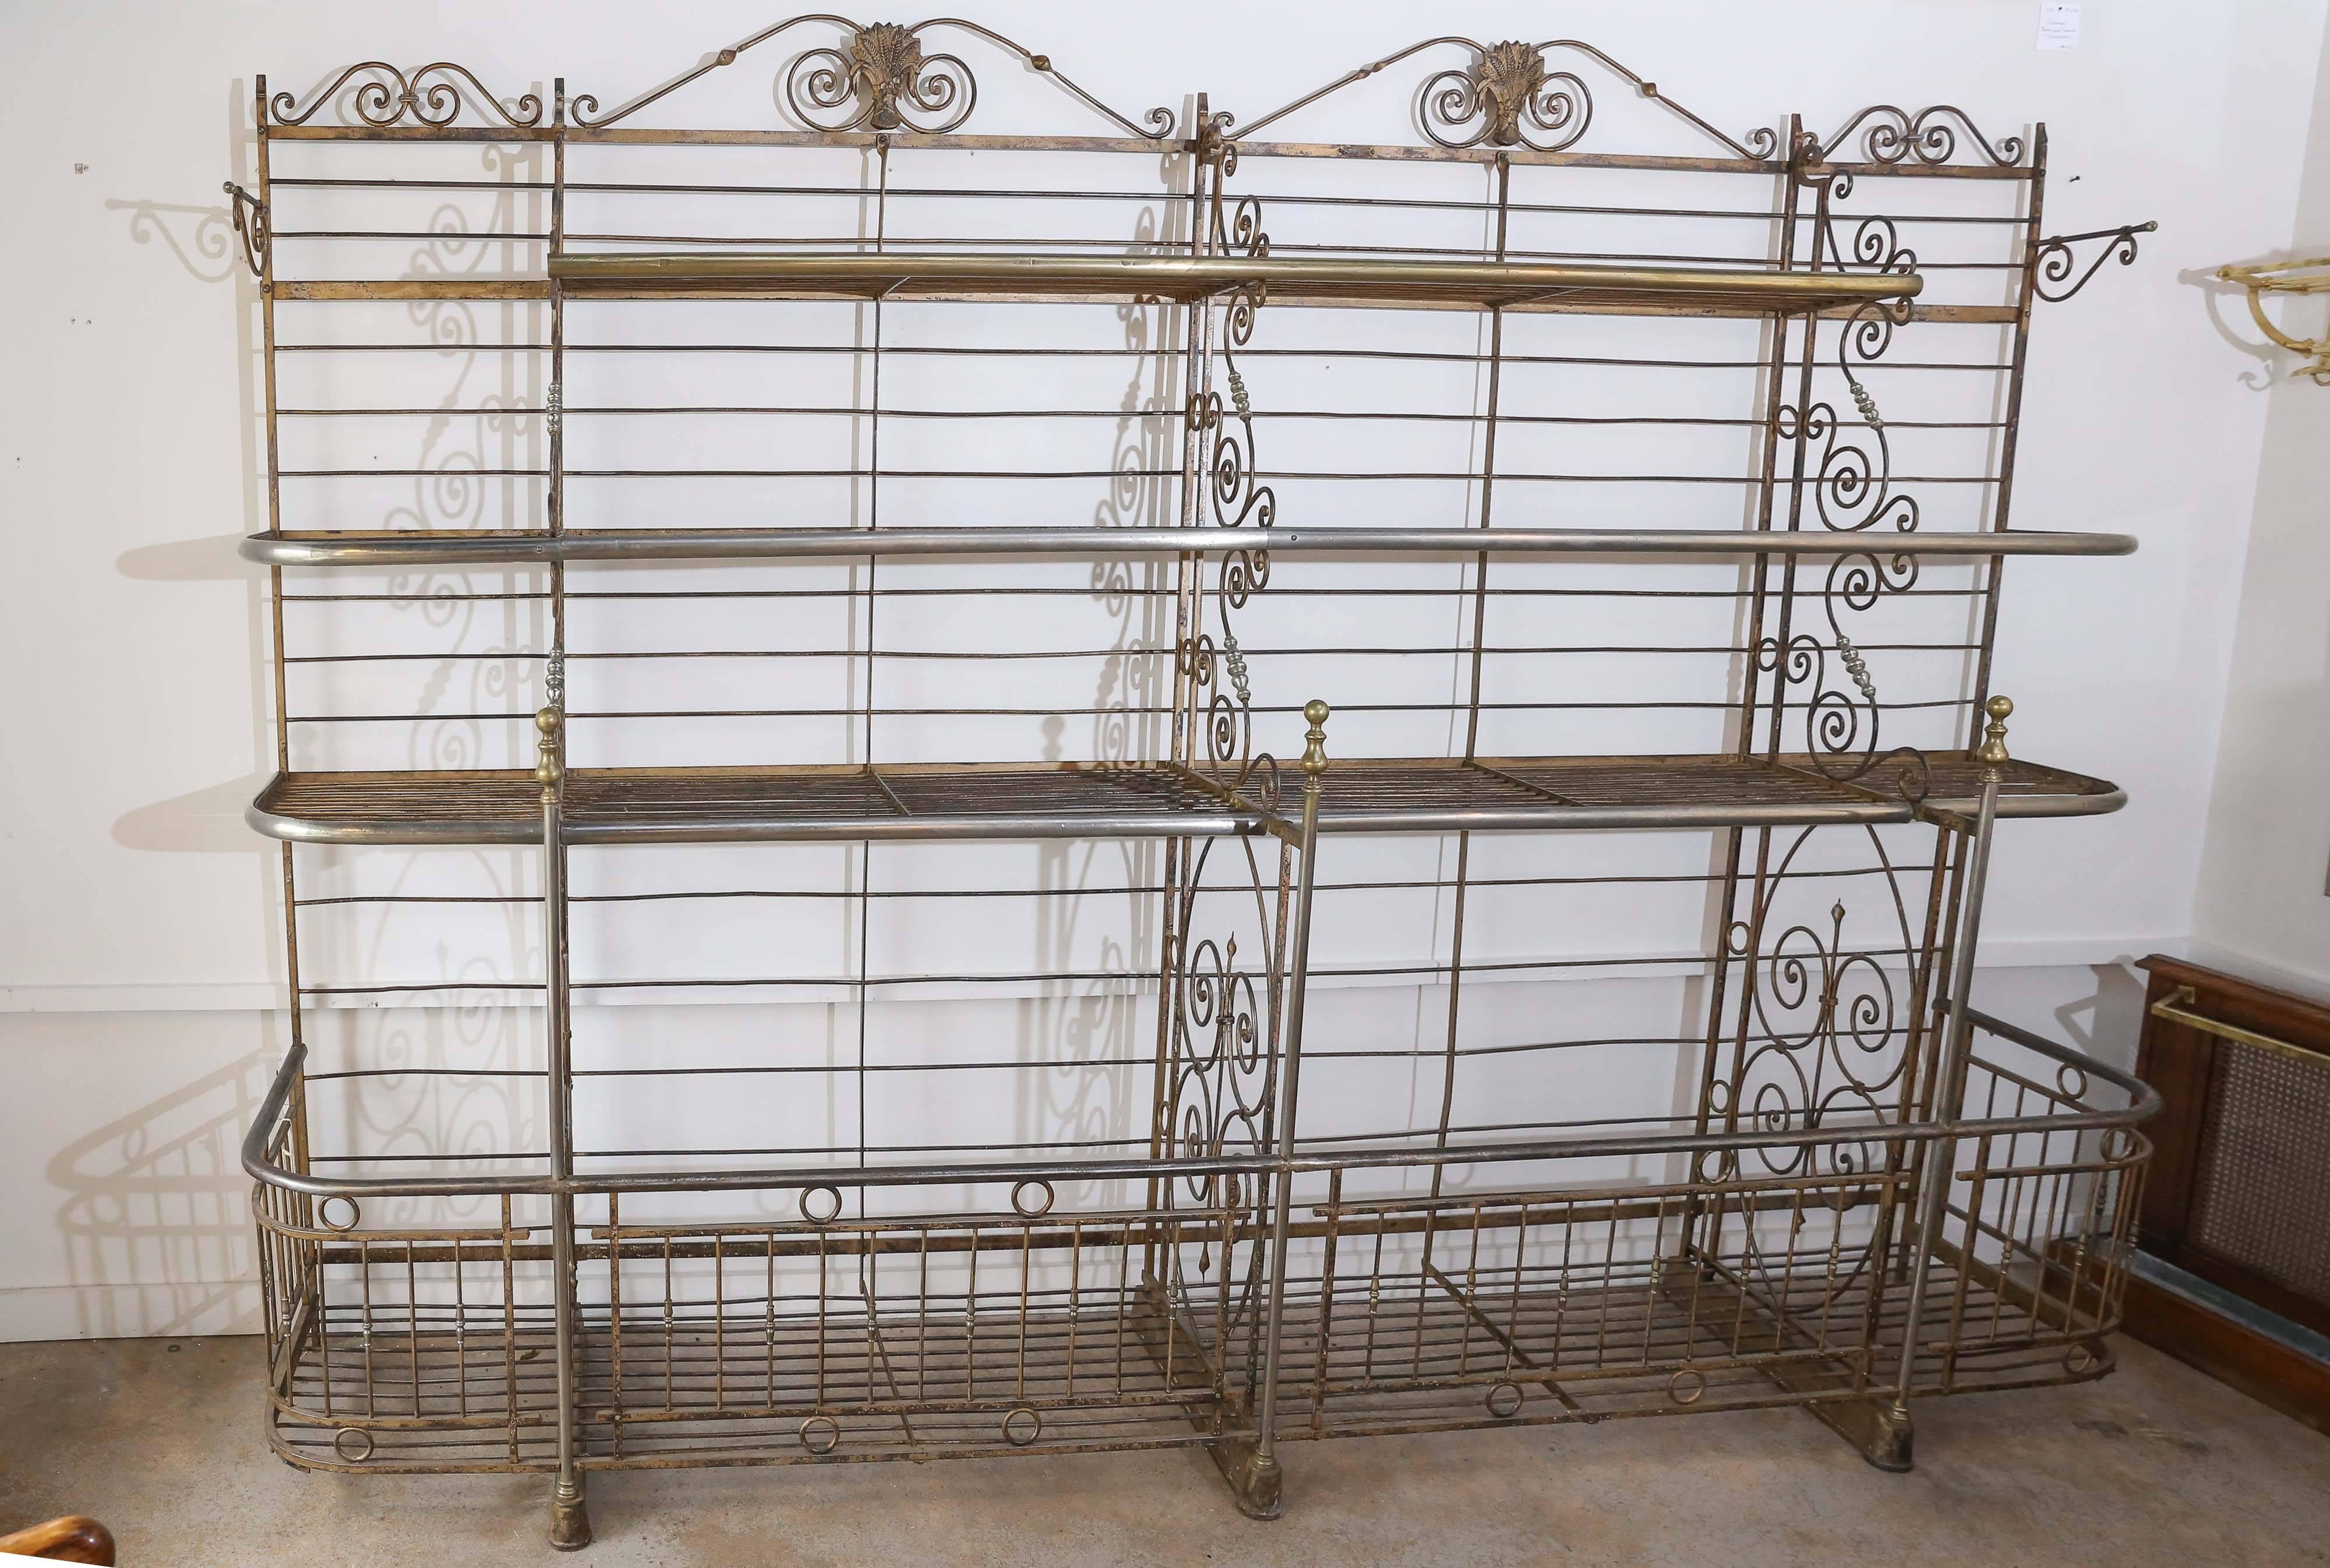 A truly outstanding bakers rack marked 'Lyon, France'. Grand in scale, this iron and brass rack has a large open gallery at the bottom with three tiers above. Intricate scroll work adorns each section and brass wheat medallions embellish the top.